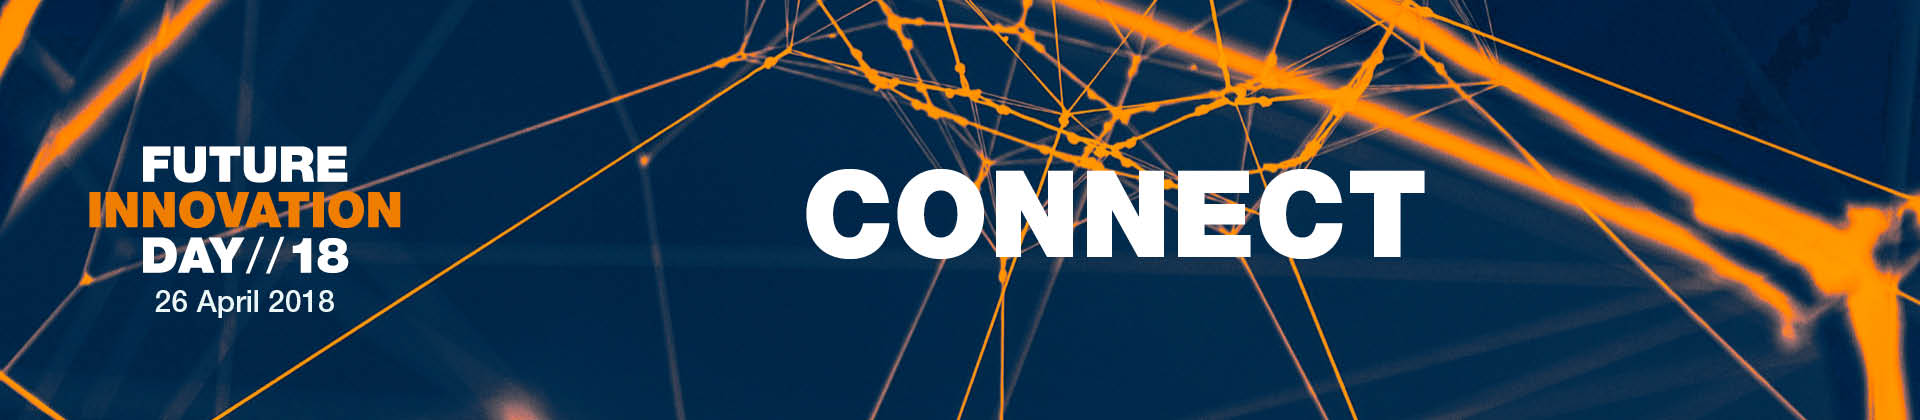 Future Innovation Project - CONNECT